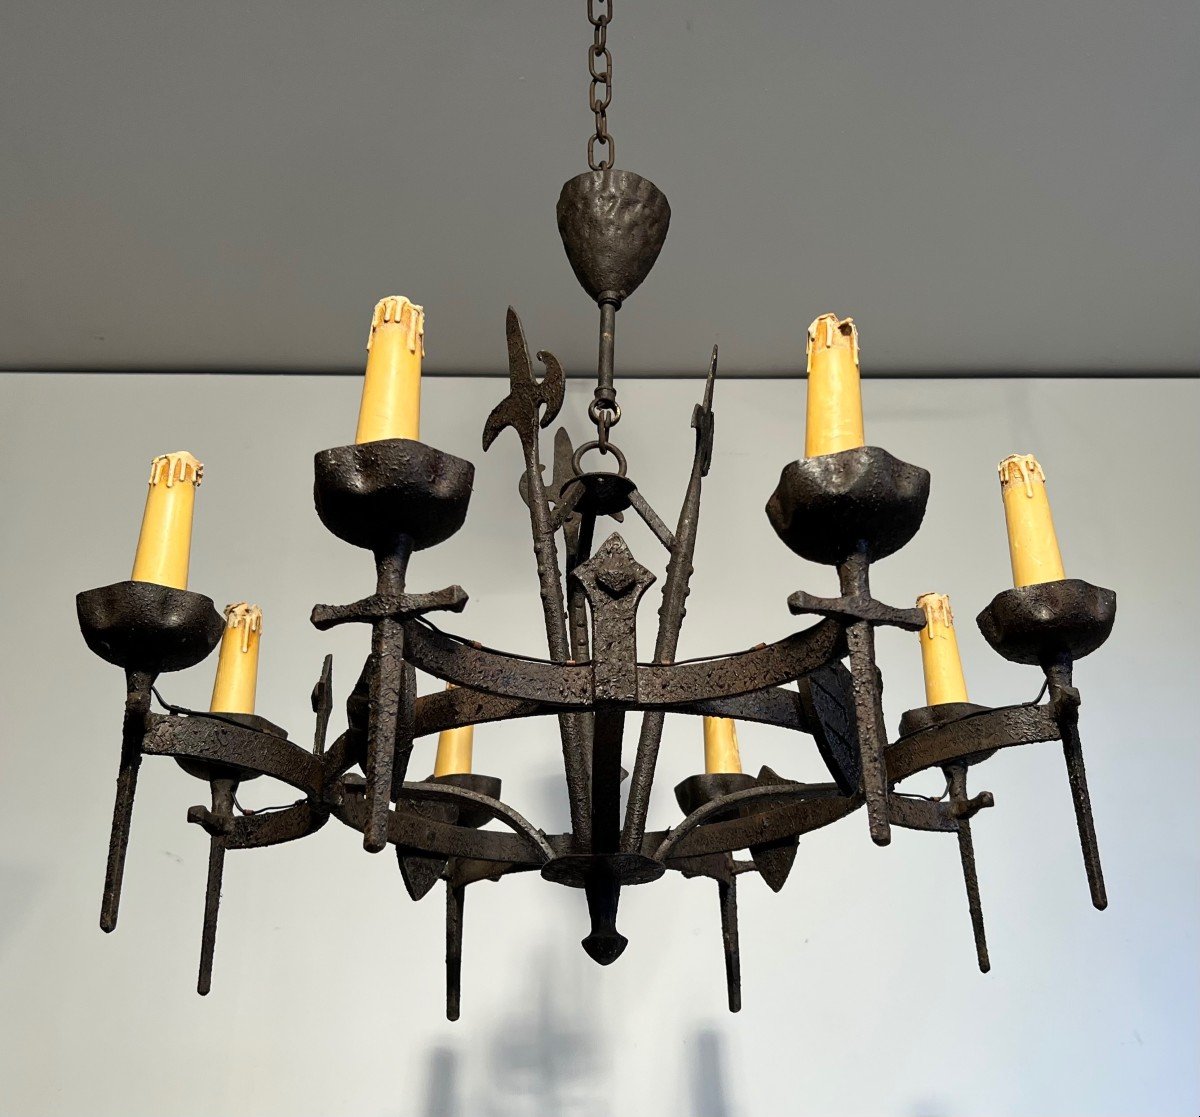 Gothic Style Wrought Iron Chandelier With 8 Arms Of Light. This Chandelier Is Part Of A Rare Set